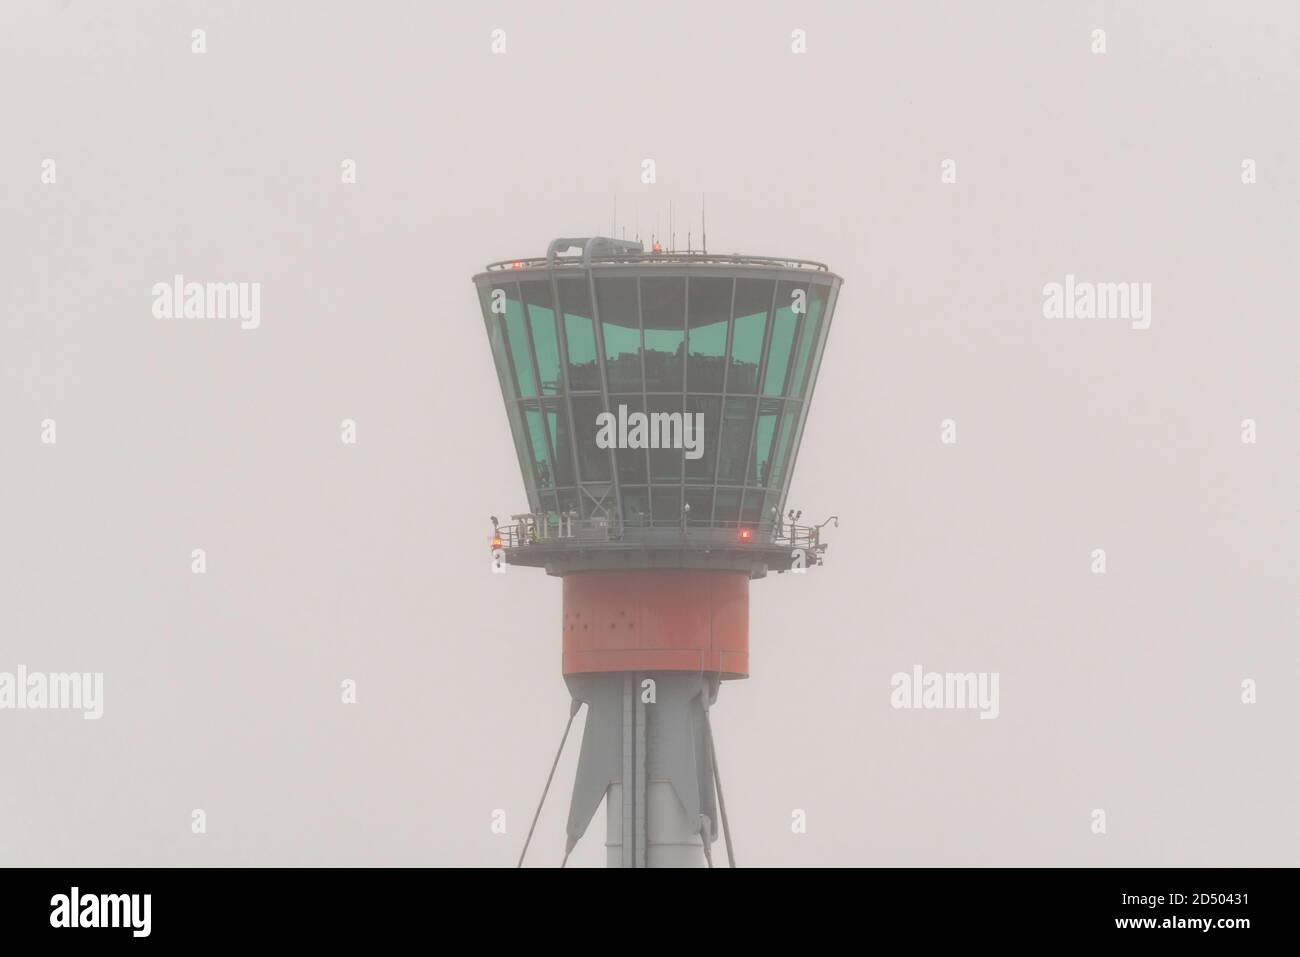 Air Traffic Control Tower at London Heathrow Airport in foggy, rainy bad weather conditions. Heavy clouds, during COVID 19 Coronavirus travel issues Stock Photo